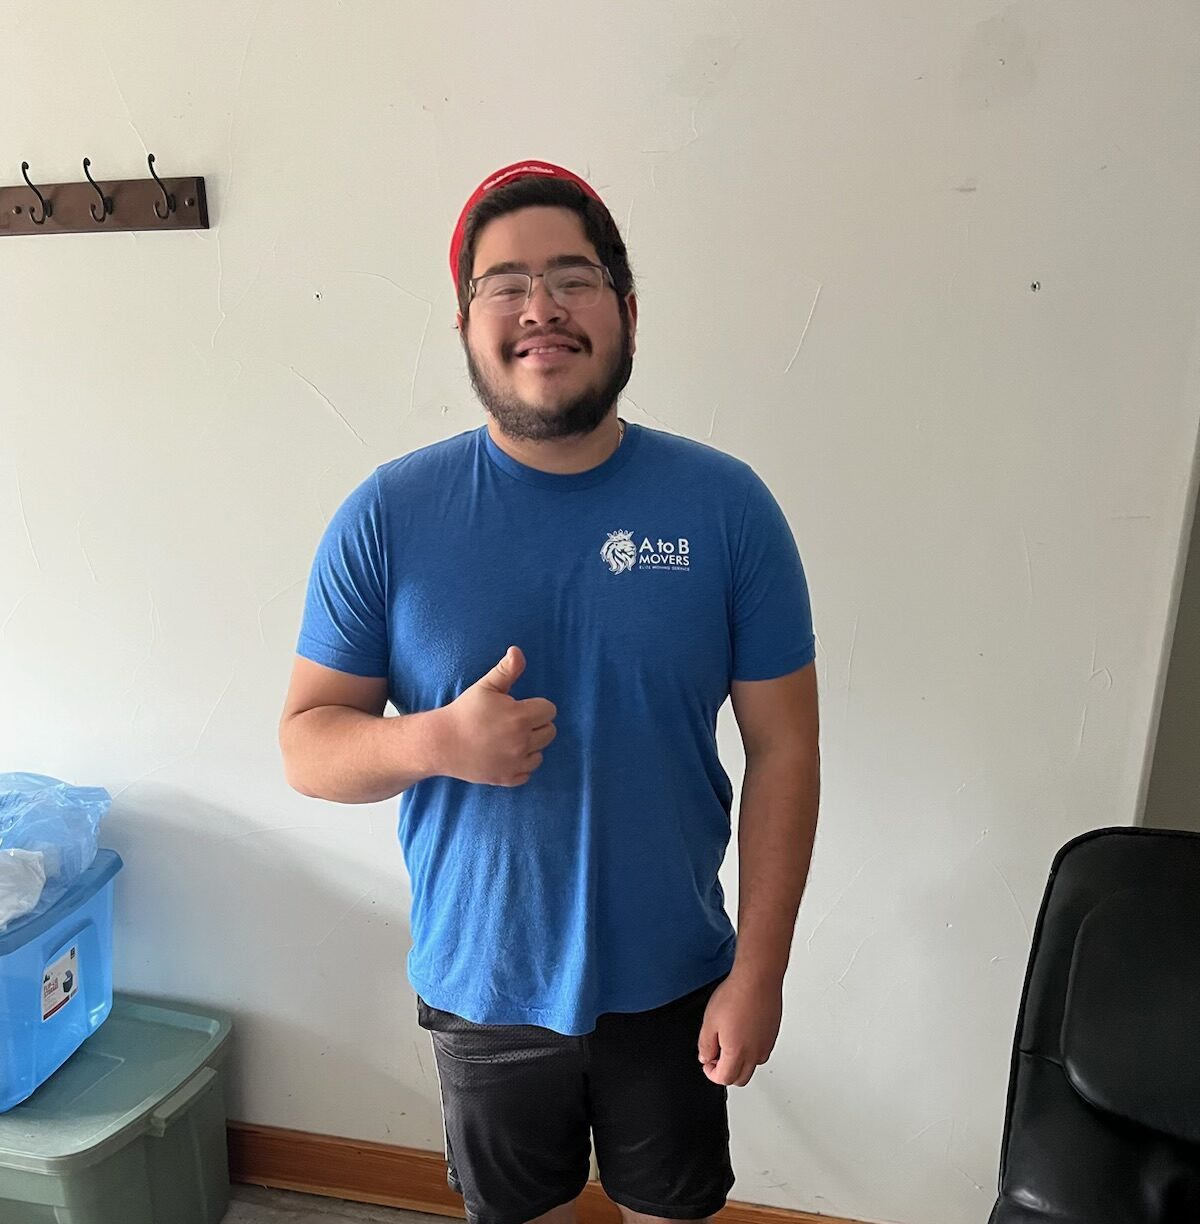 Meet A to B Mover's Moving Technician LEO - A Professional Mover in Colorado